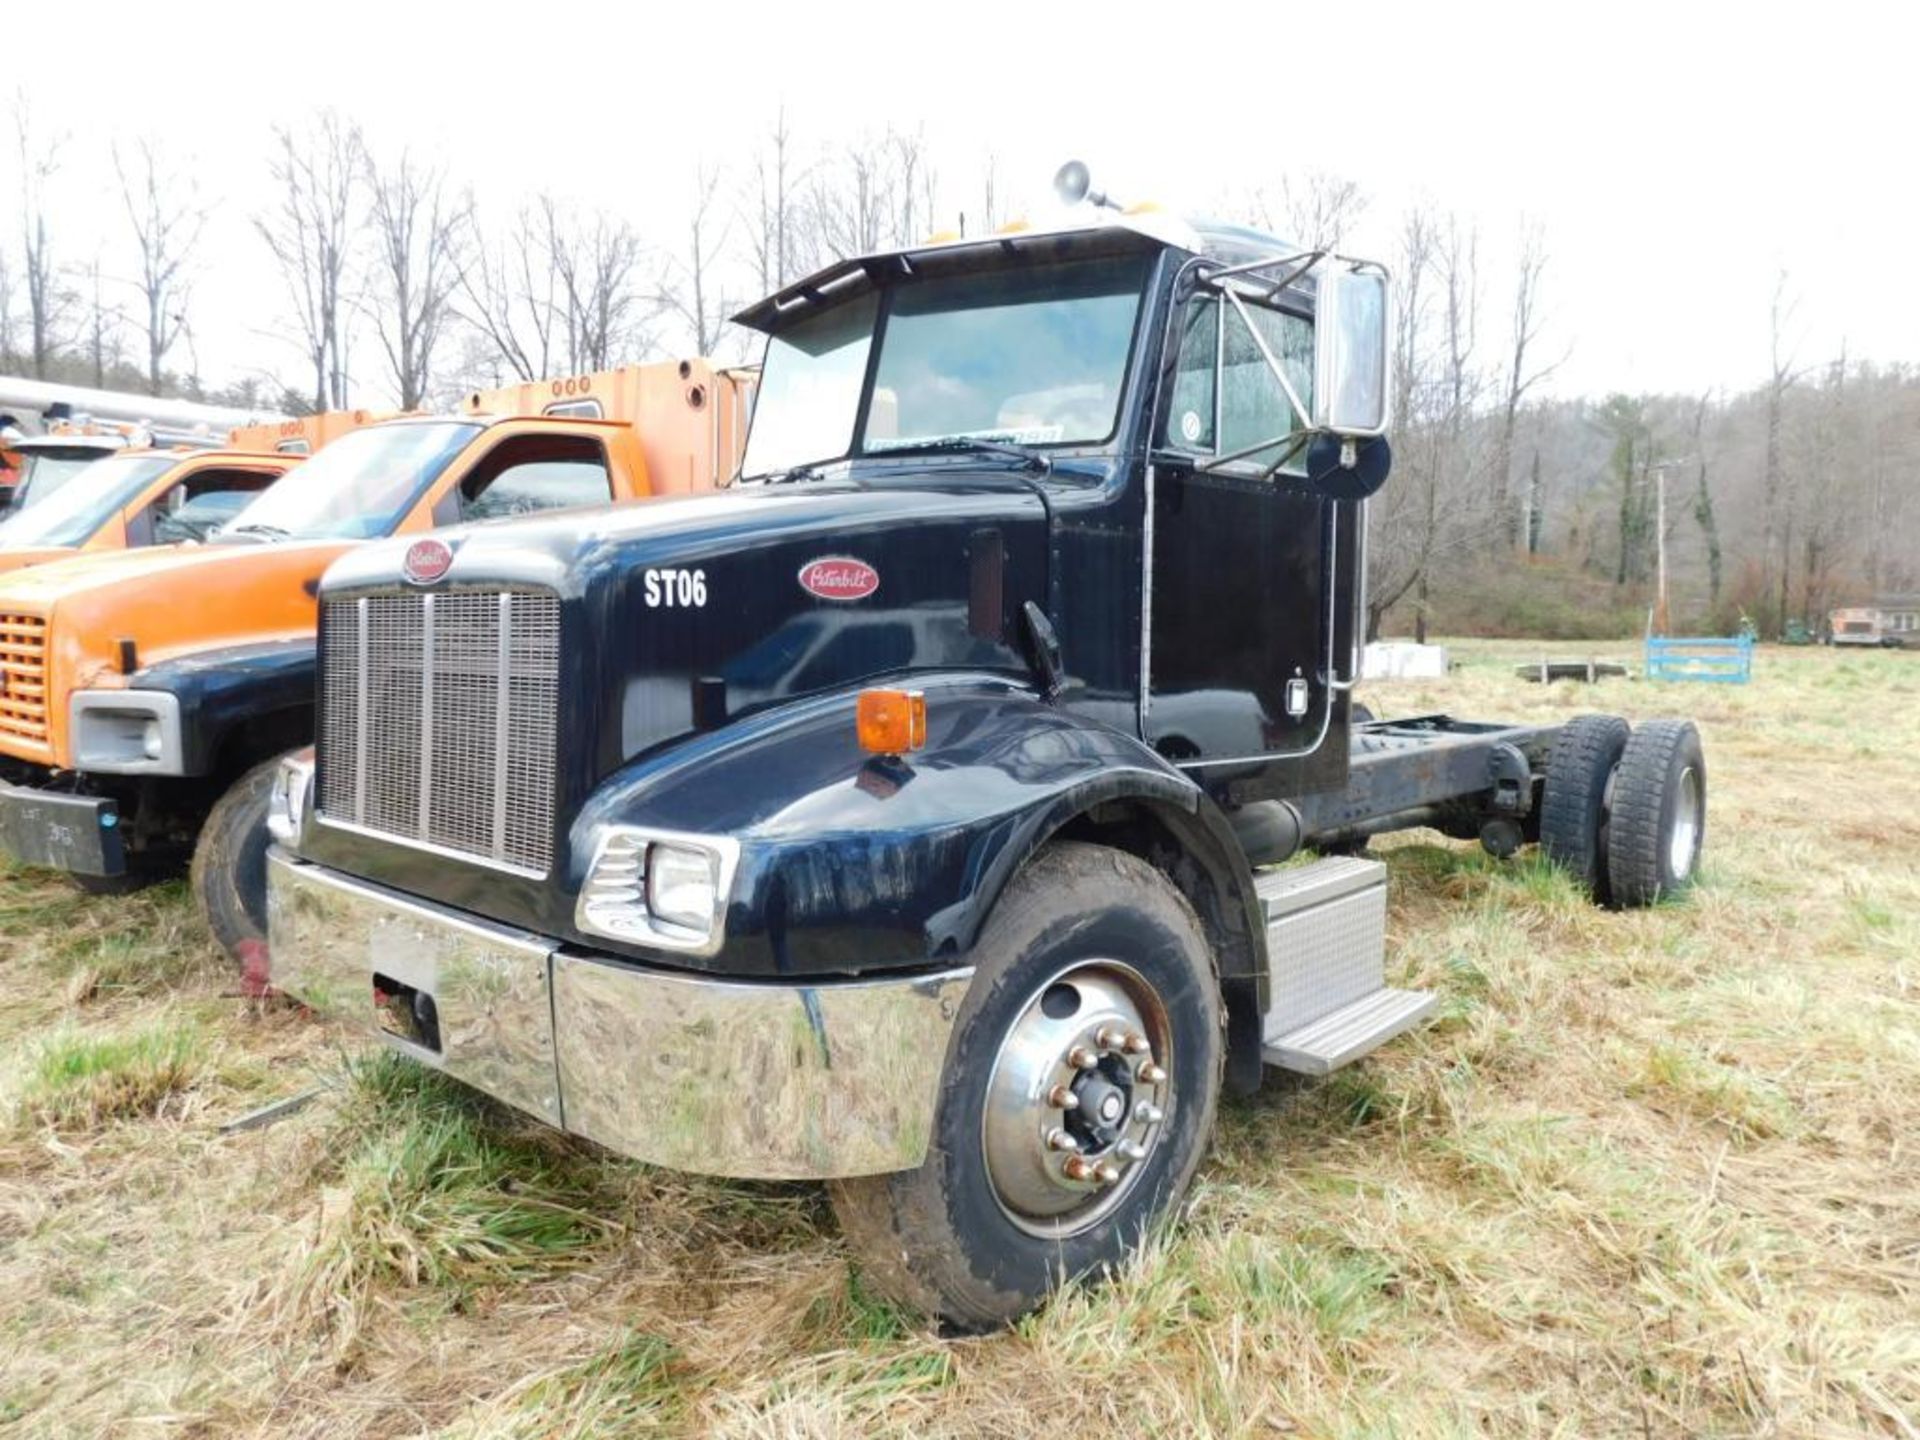 2004 Peterbilt 330, VIN 2NPNHD7X04M818161, 99,206 Miles Indicated, ST06 (AS, IS)